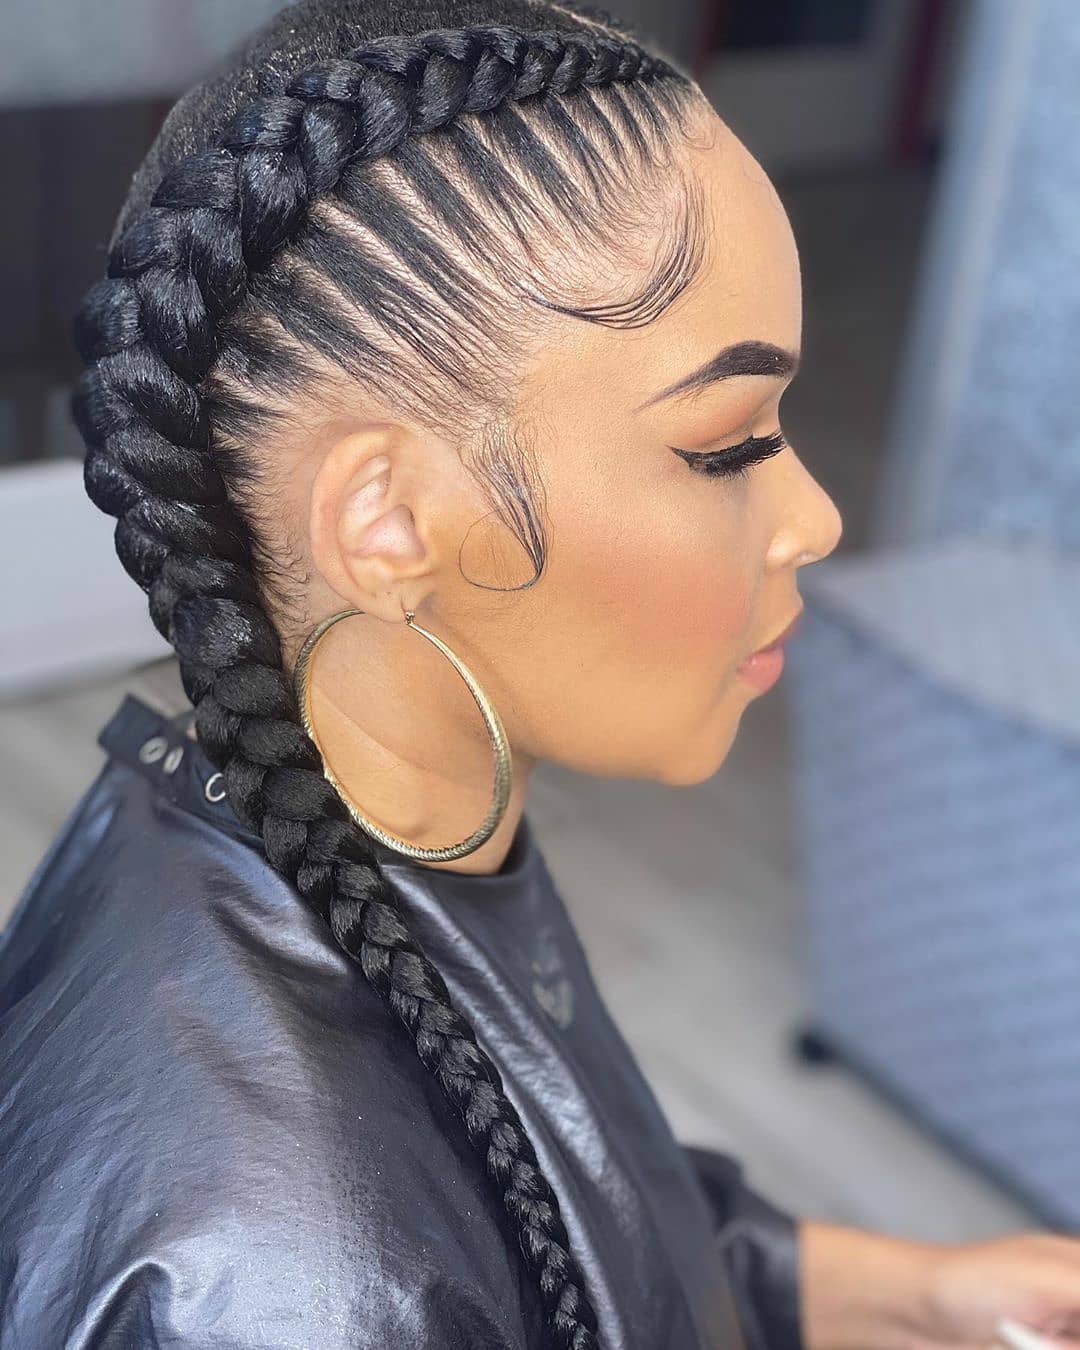 Different types of braids styles for black hair: 2020 Best Braids for